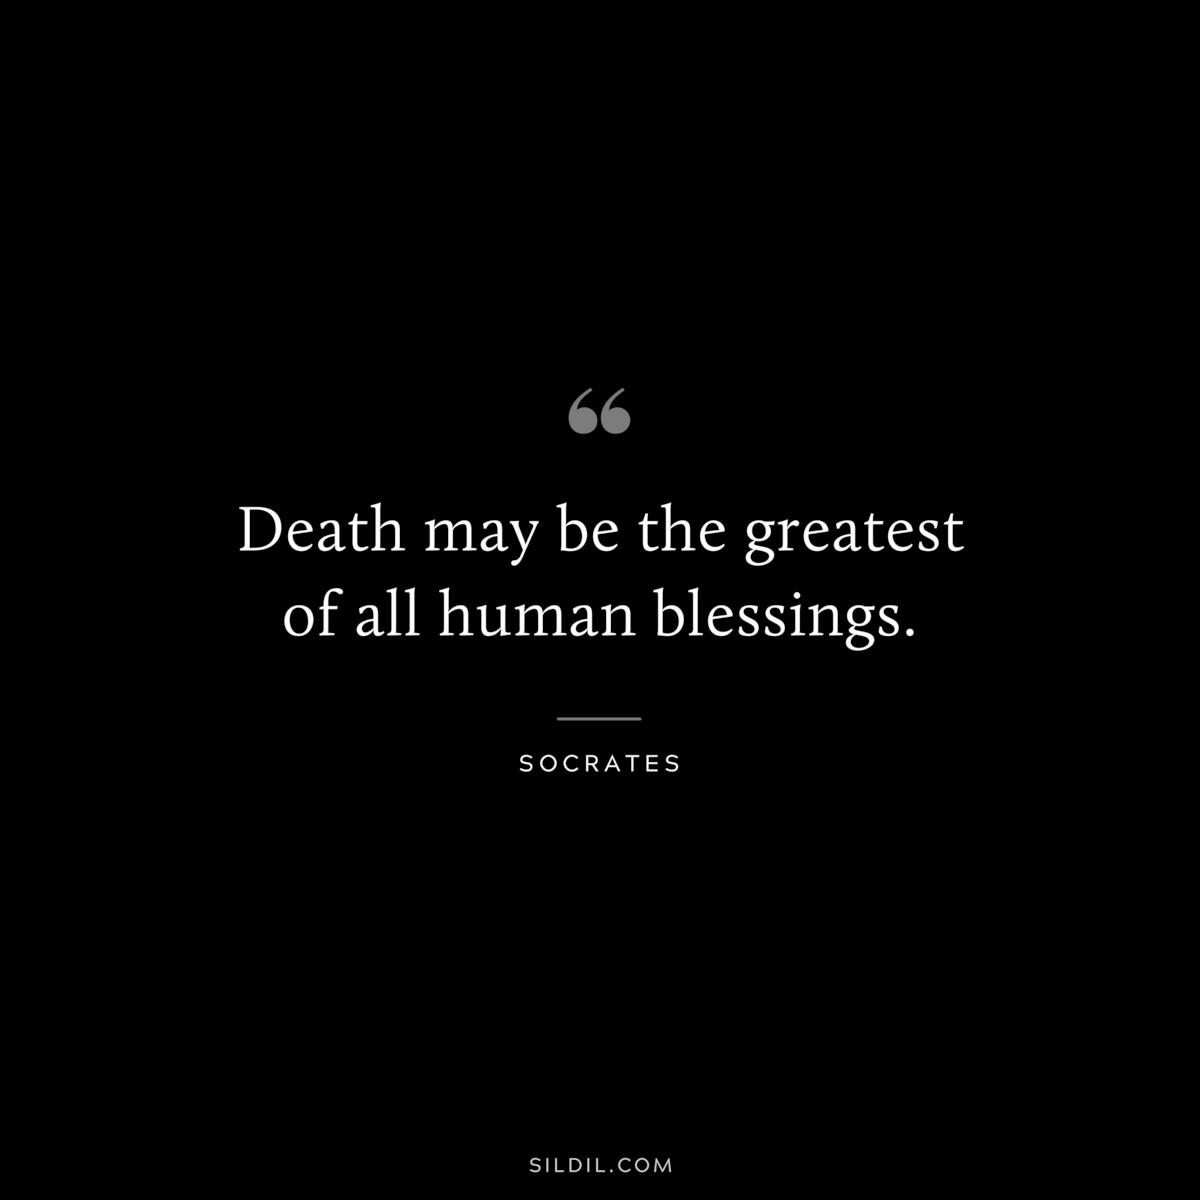 Death may be the greatest of all human blessings. ― Socrates